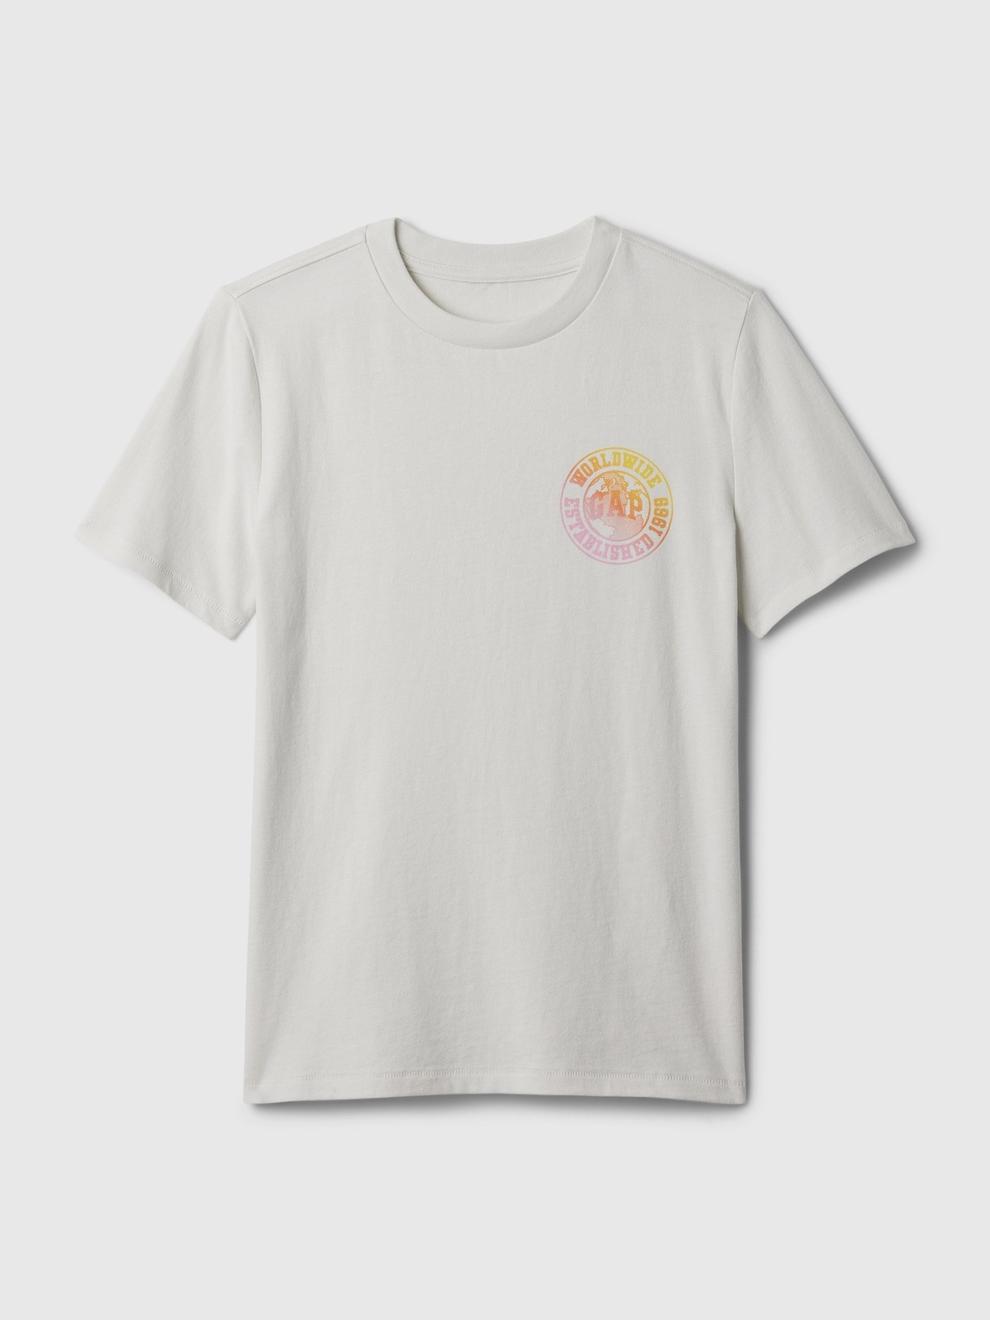 Kids Graphic T-Shirt offers at 69 Dhs in Gap